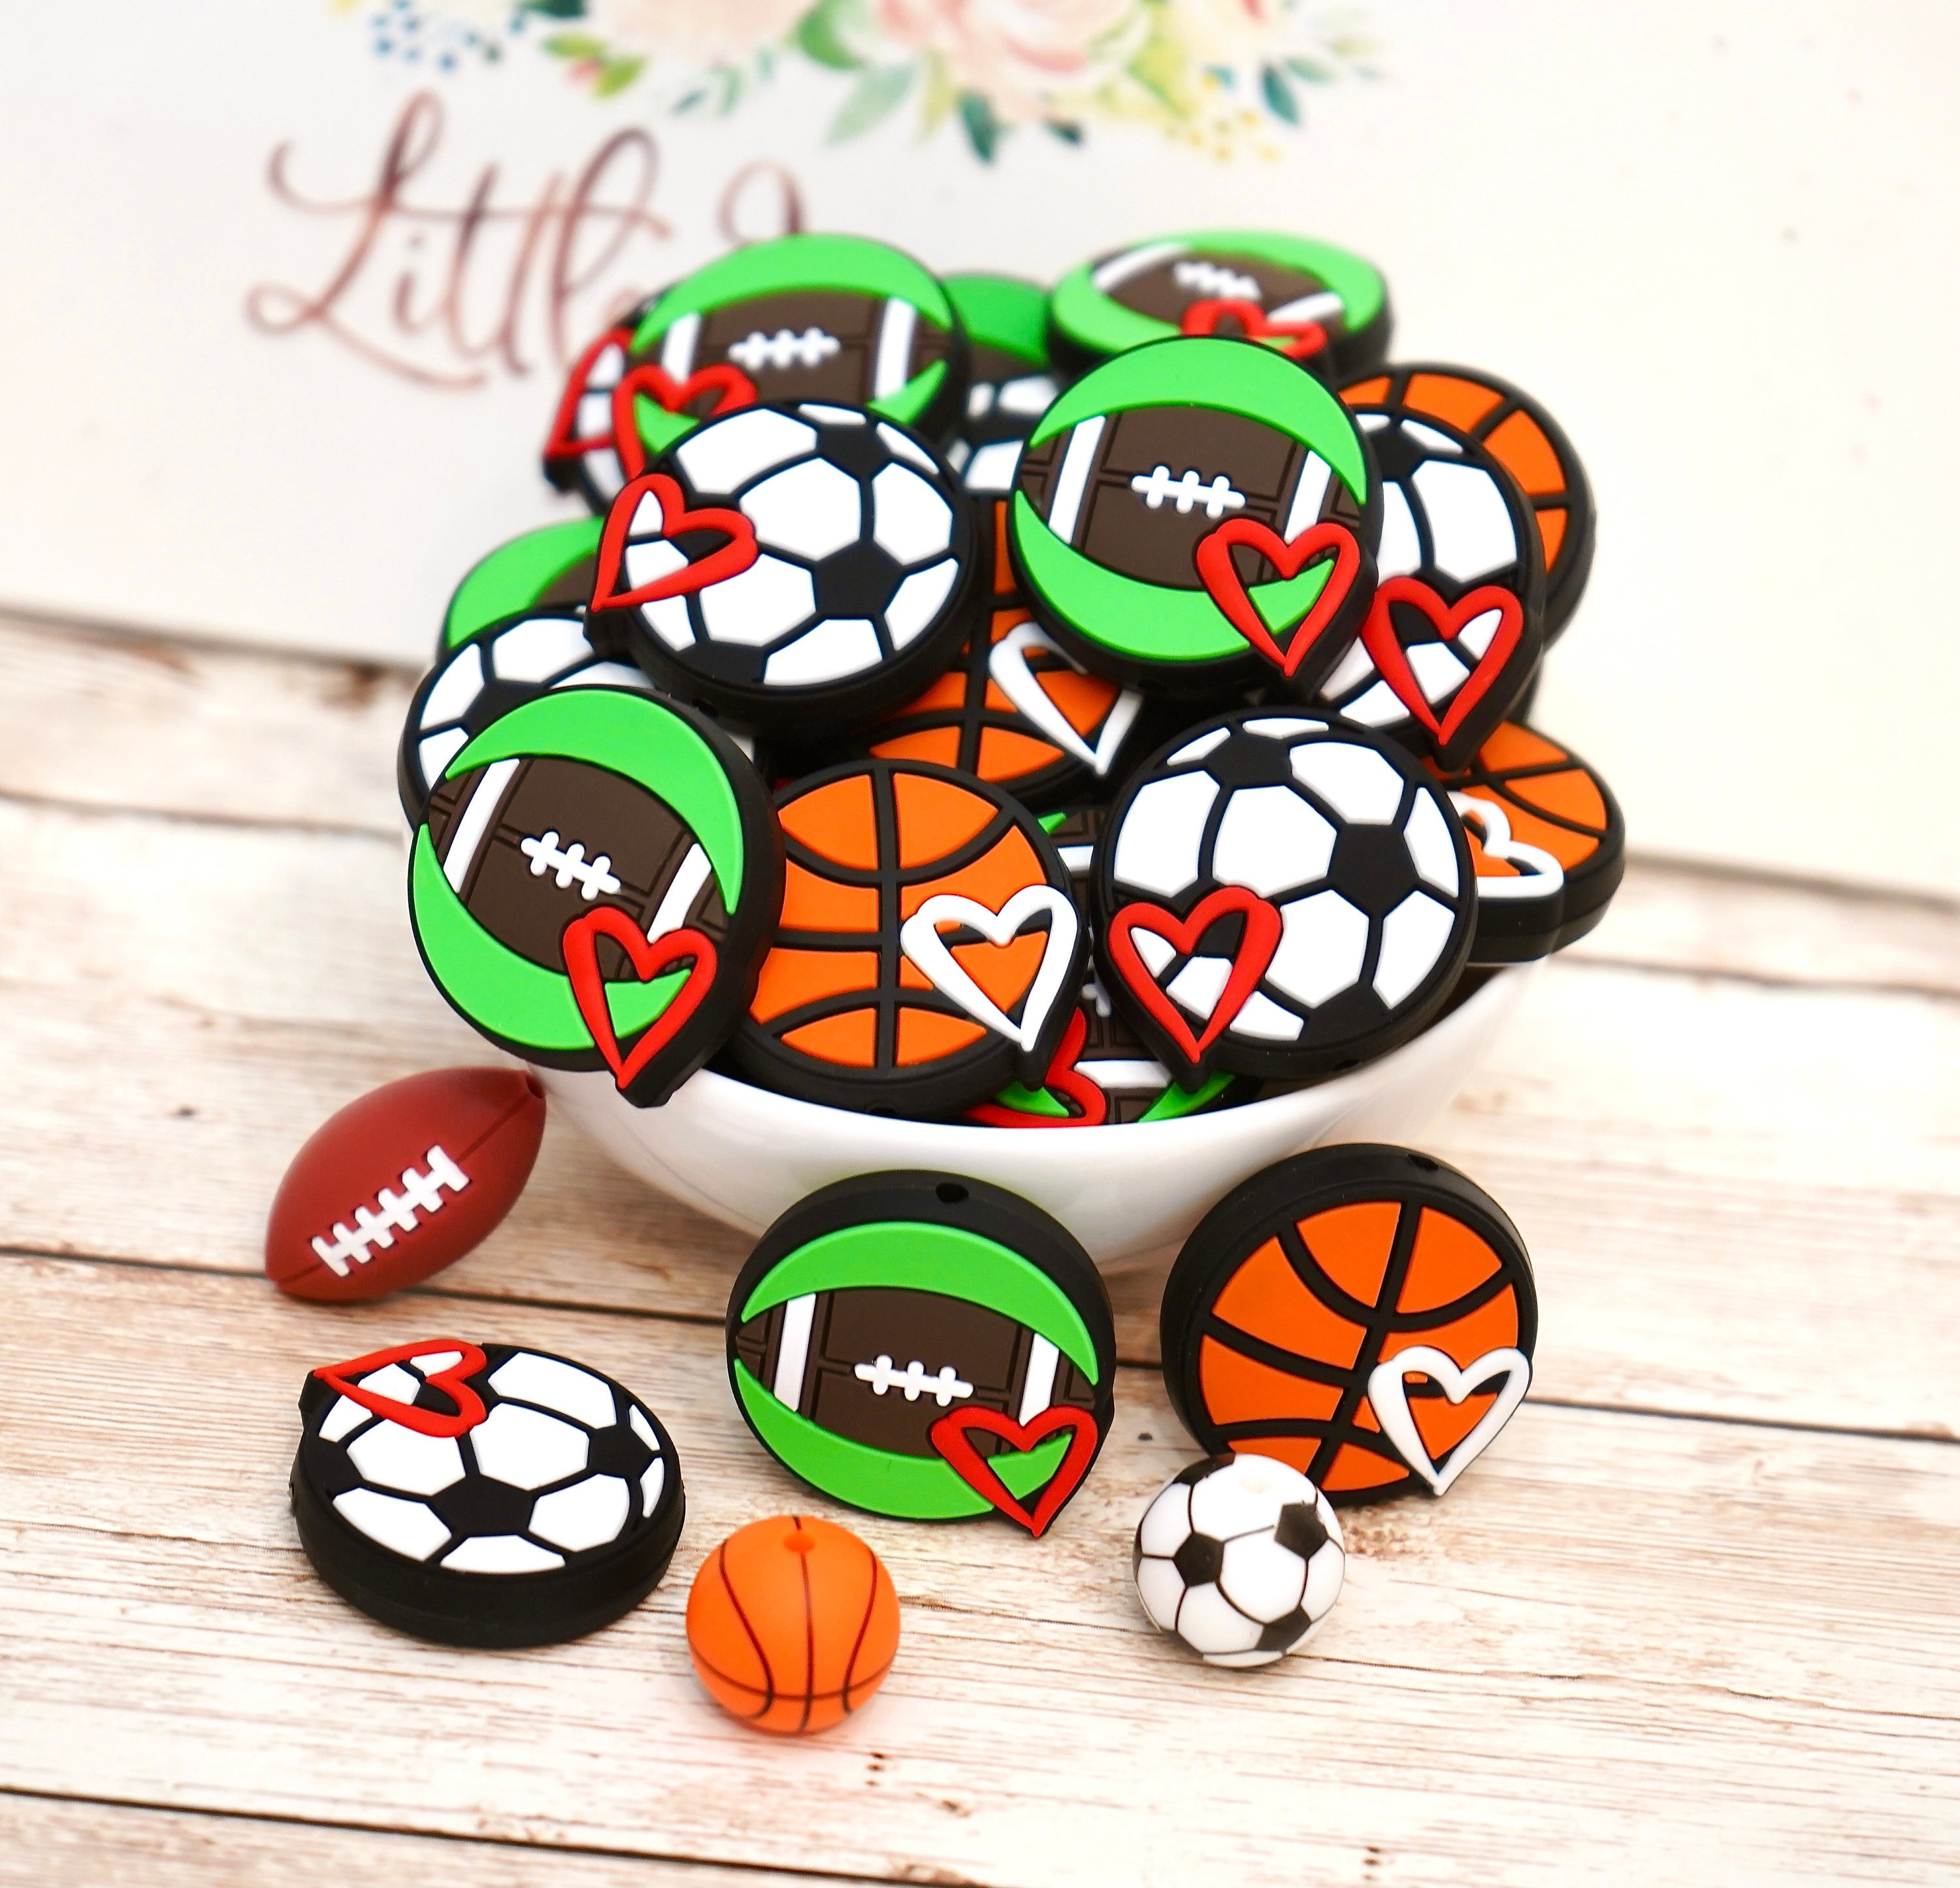 Bracelet Charms Bulk Baseball Softball Football Round DIY Silicone Beads Soccer Basketball Volleyball Silicone Accessory Kit for Keychain Making